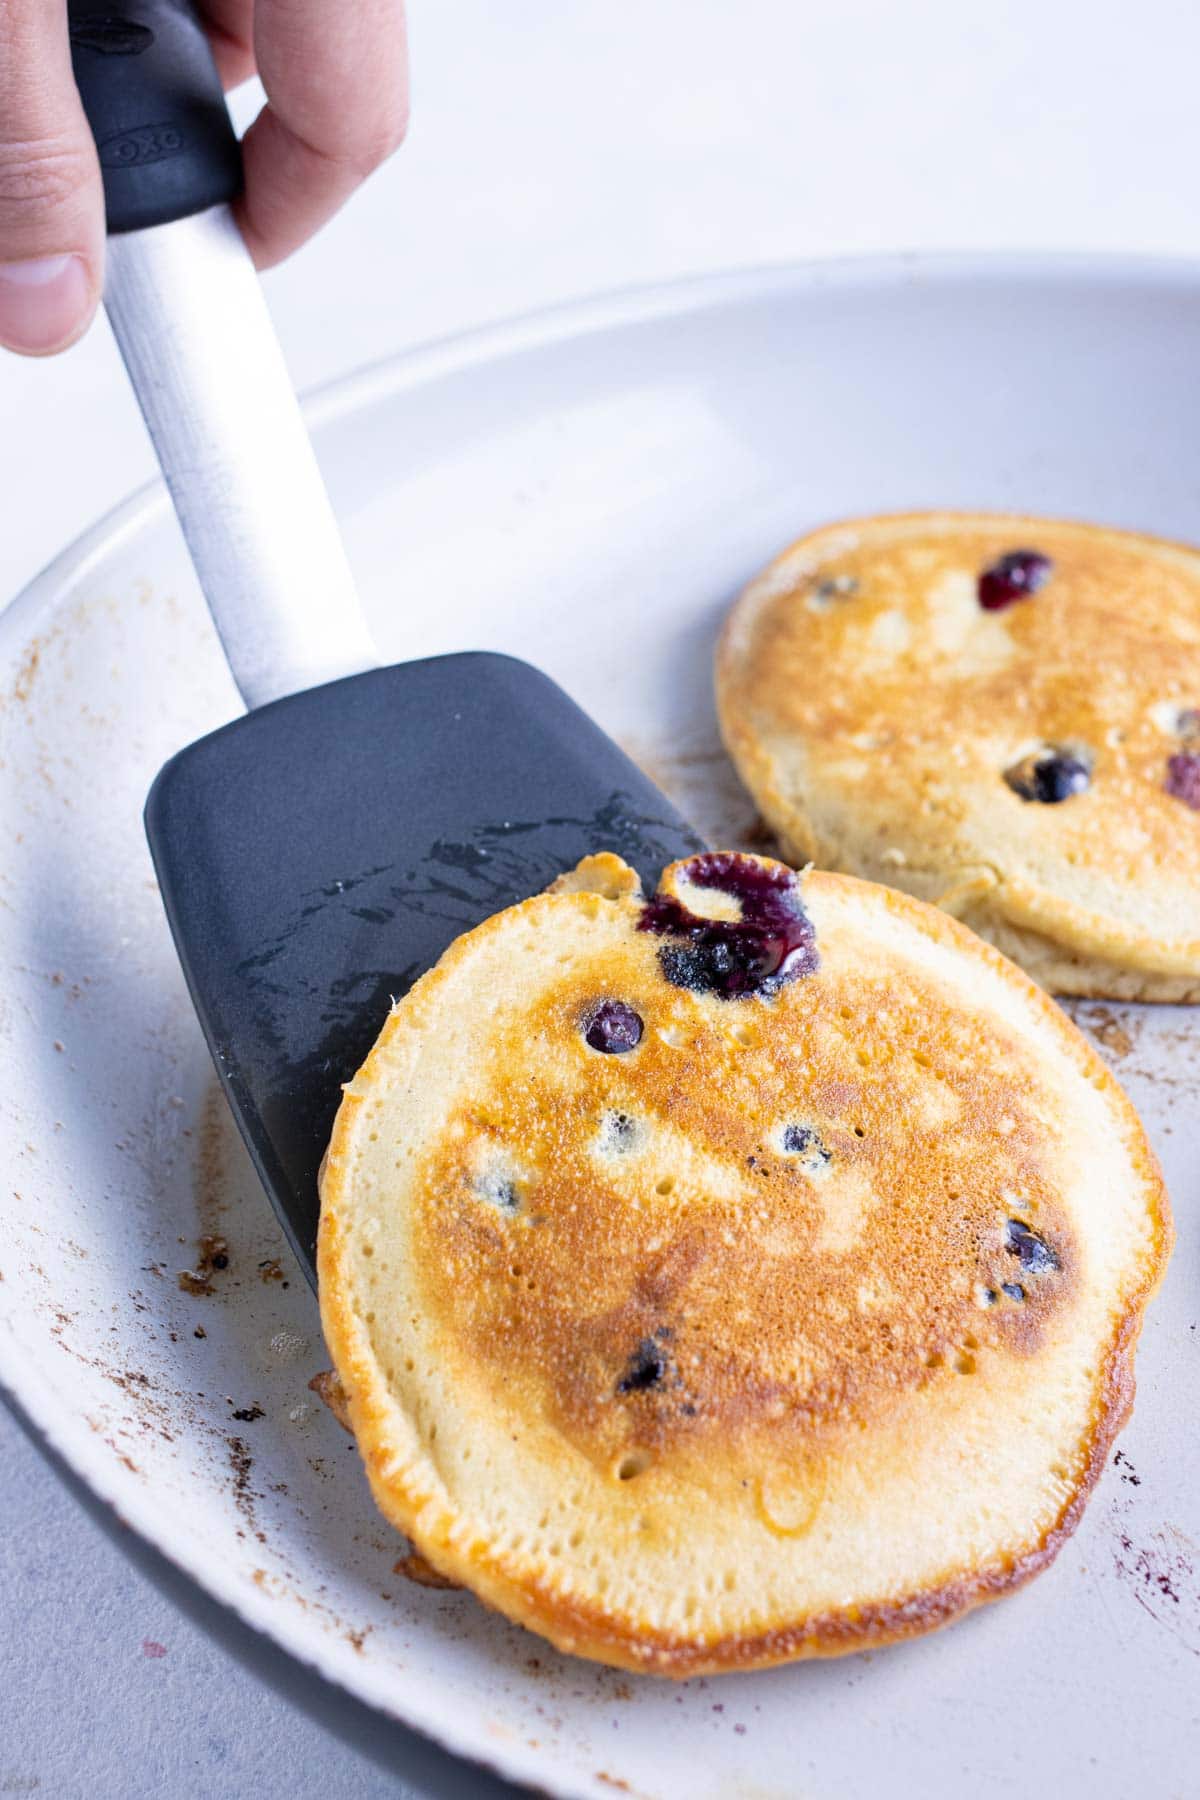 A spatula is used to flip the pancakes to cook each side.